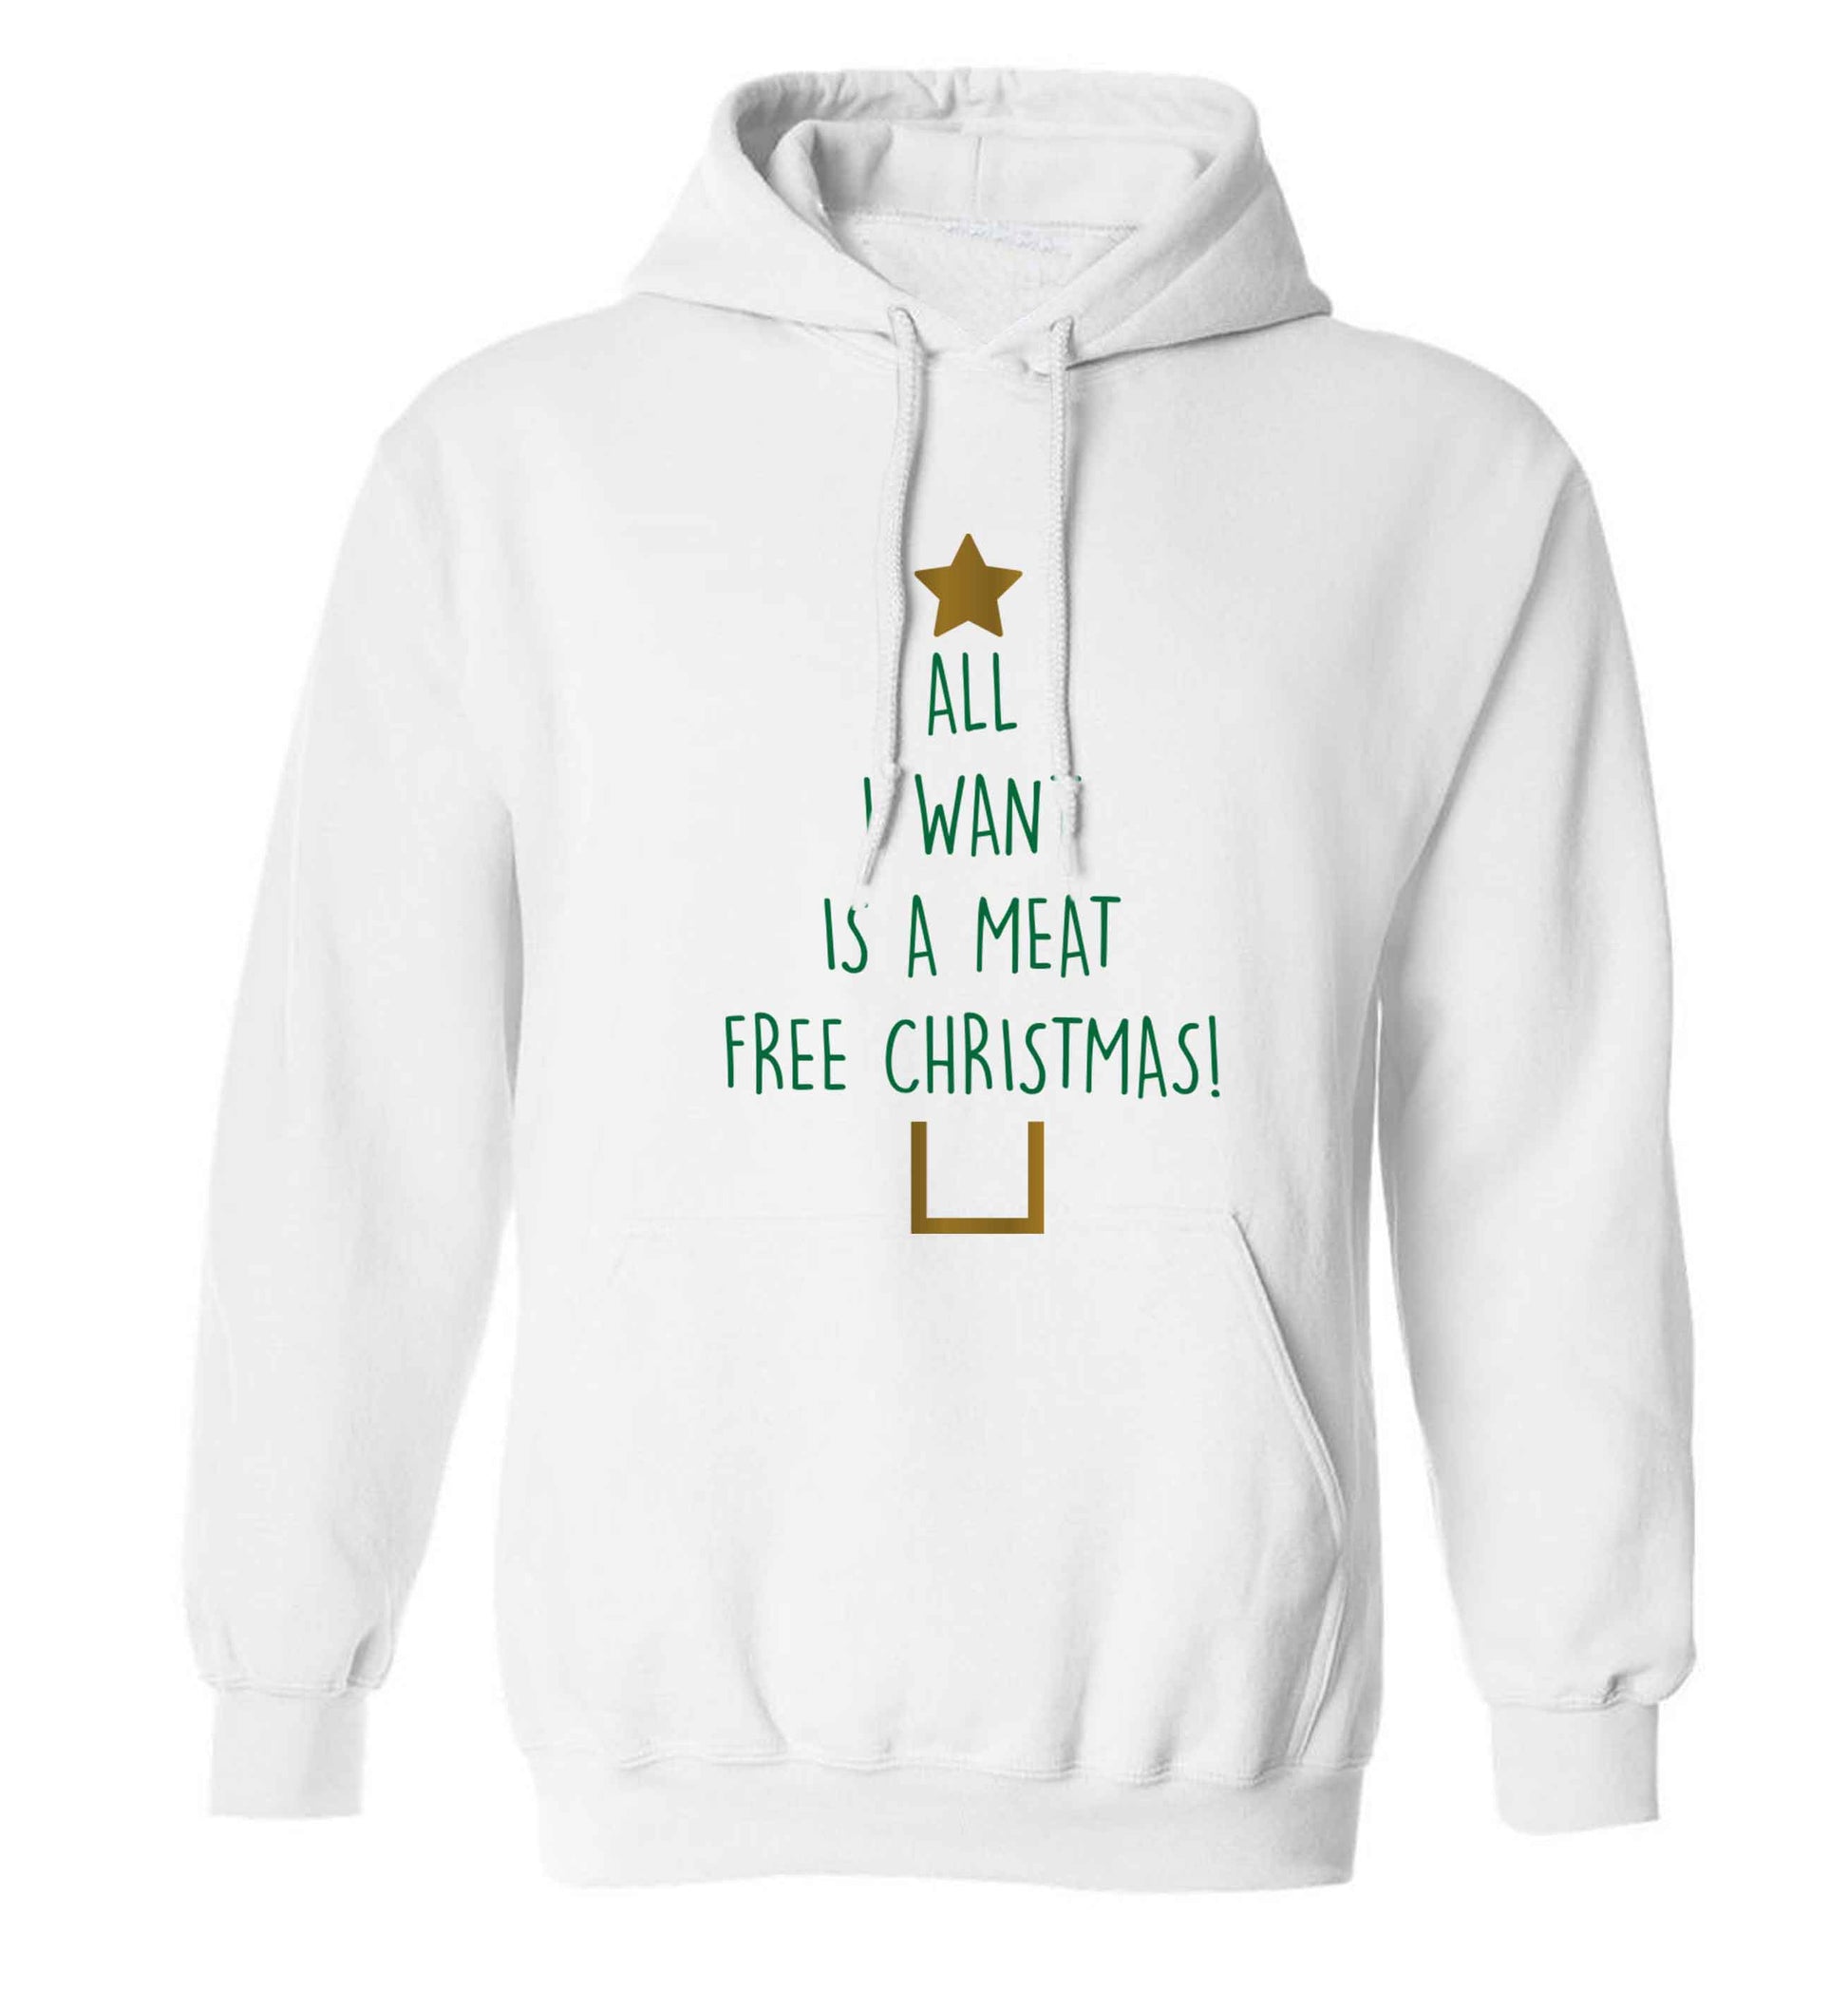 All I want is a meat free Christmas adults unisex white hoodie 2XL